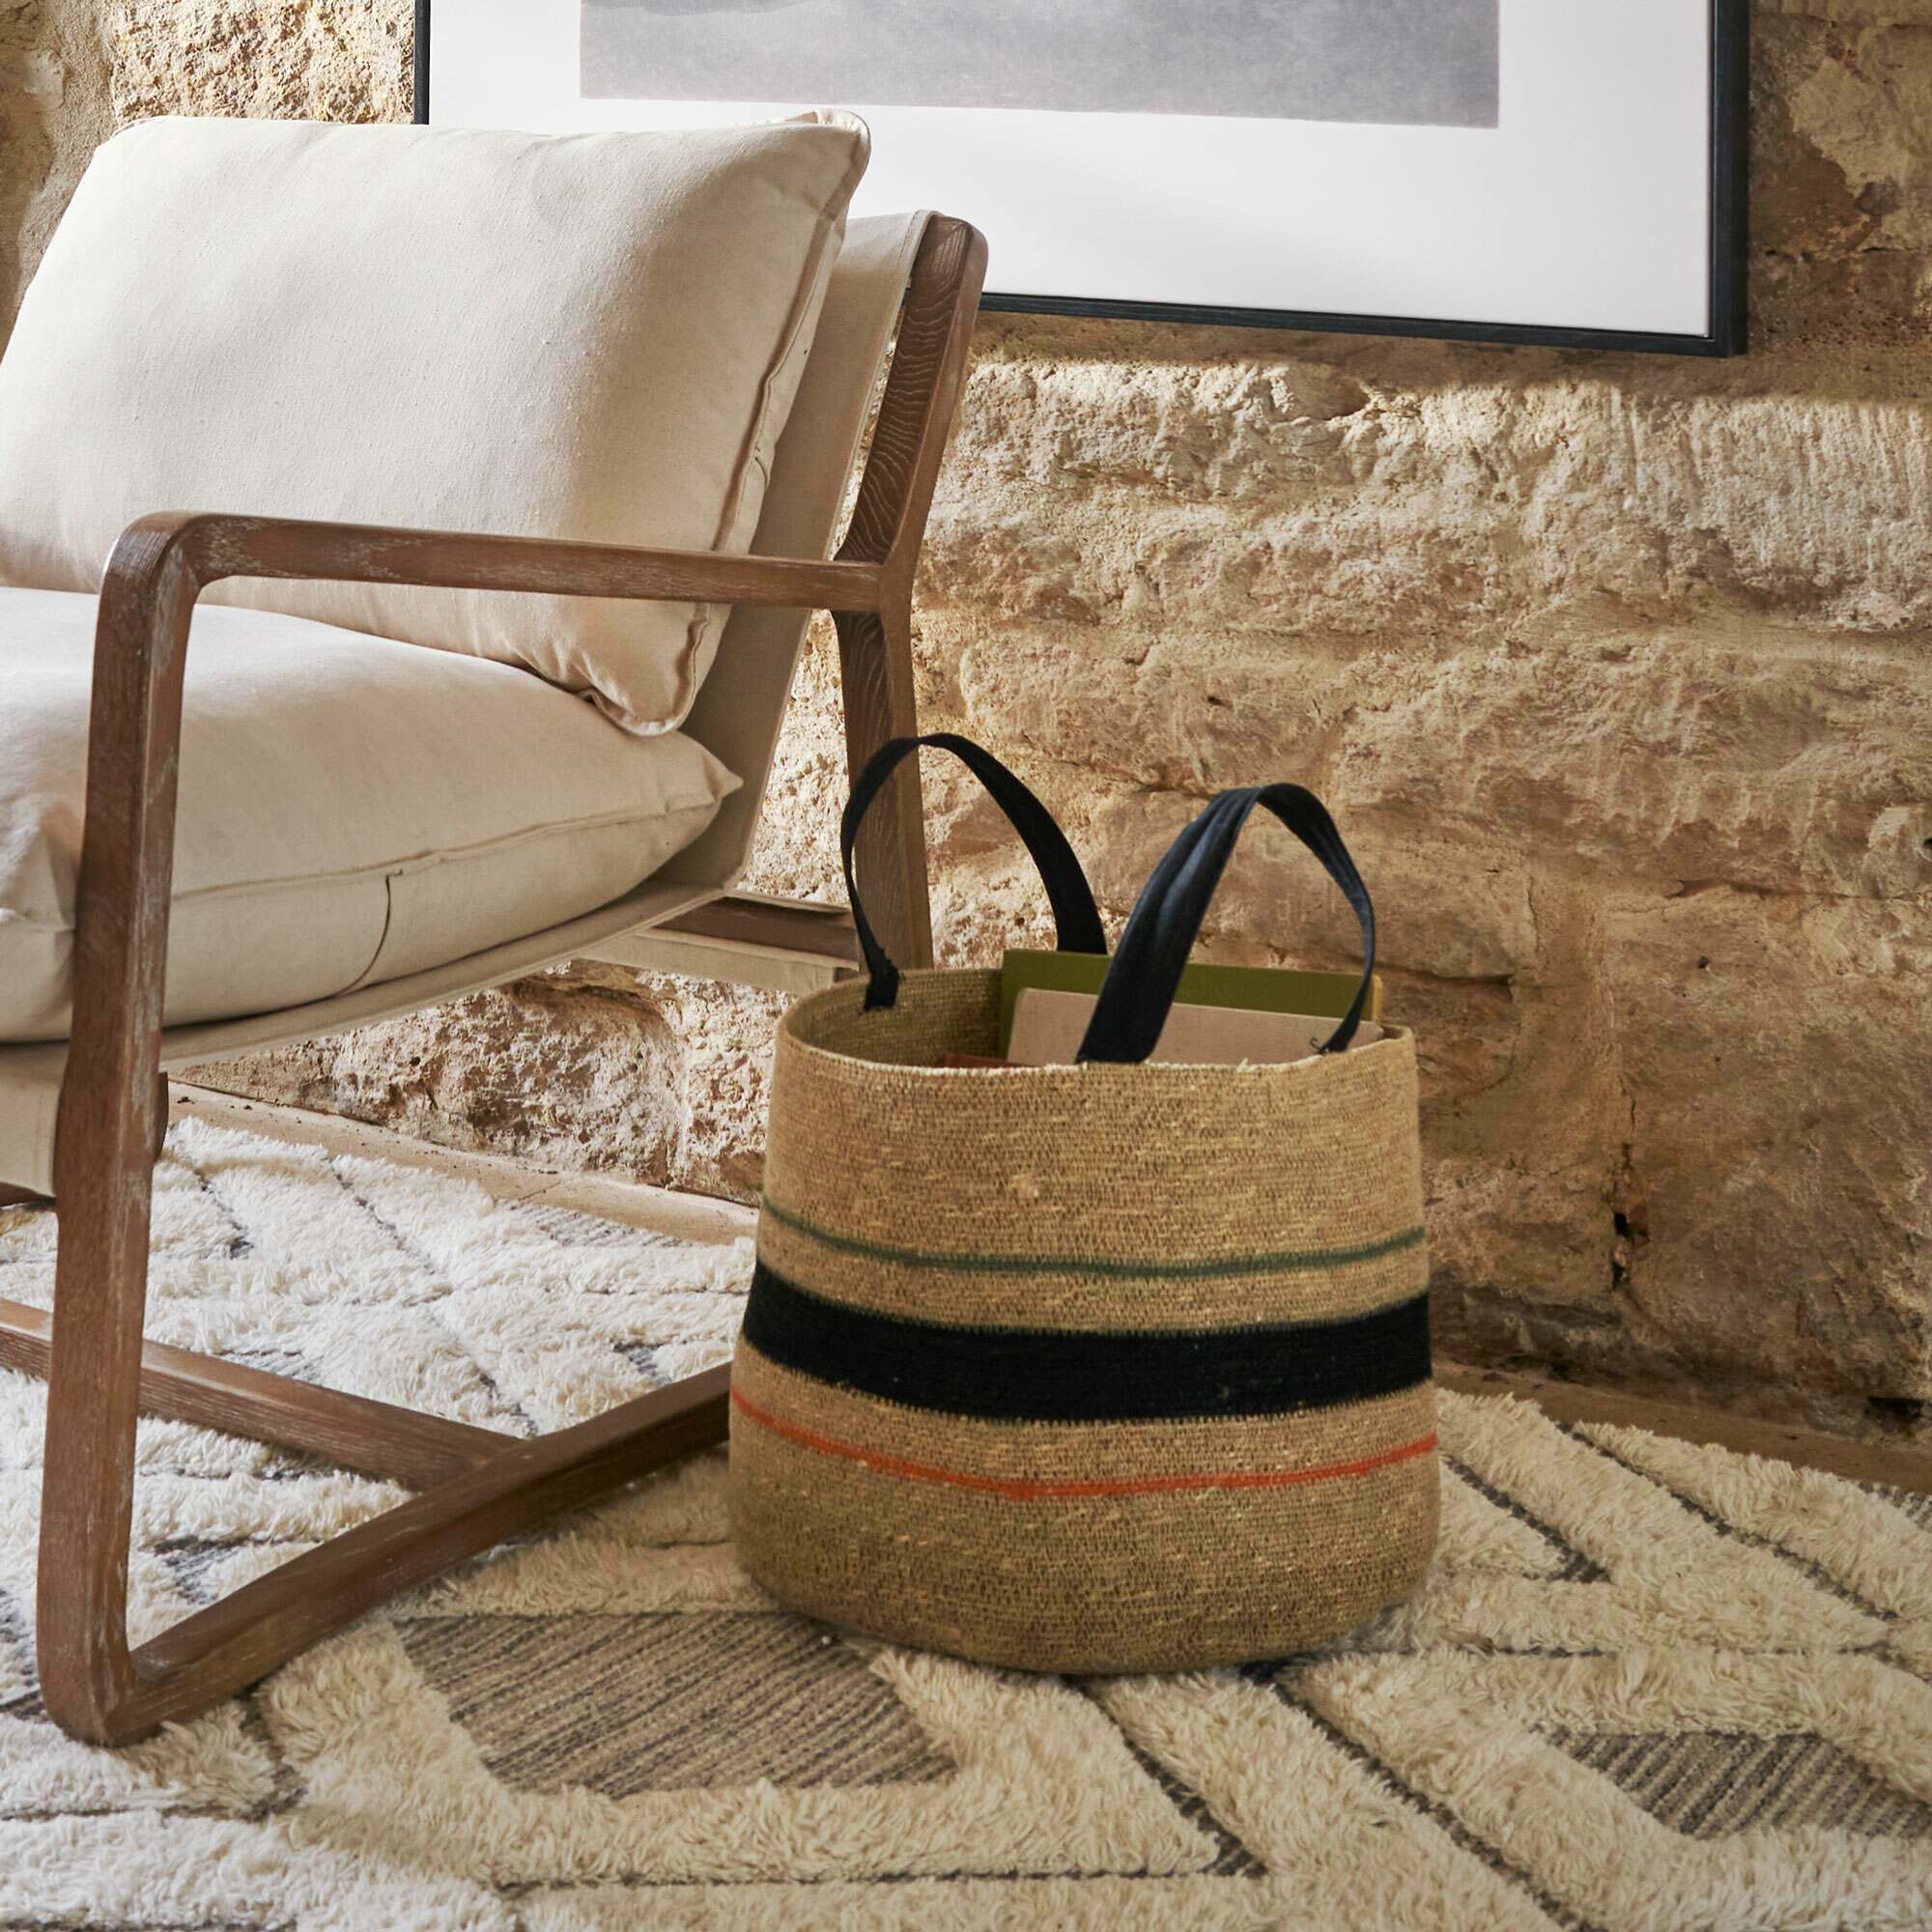 Photo of Graham and green striped seagrass basket with handles